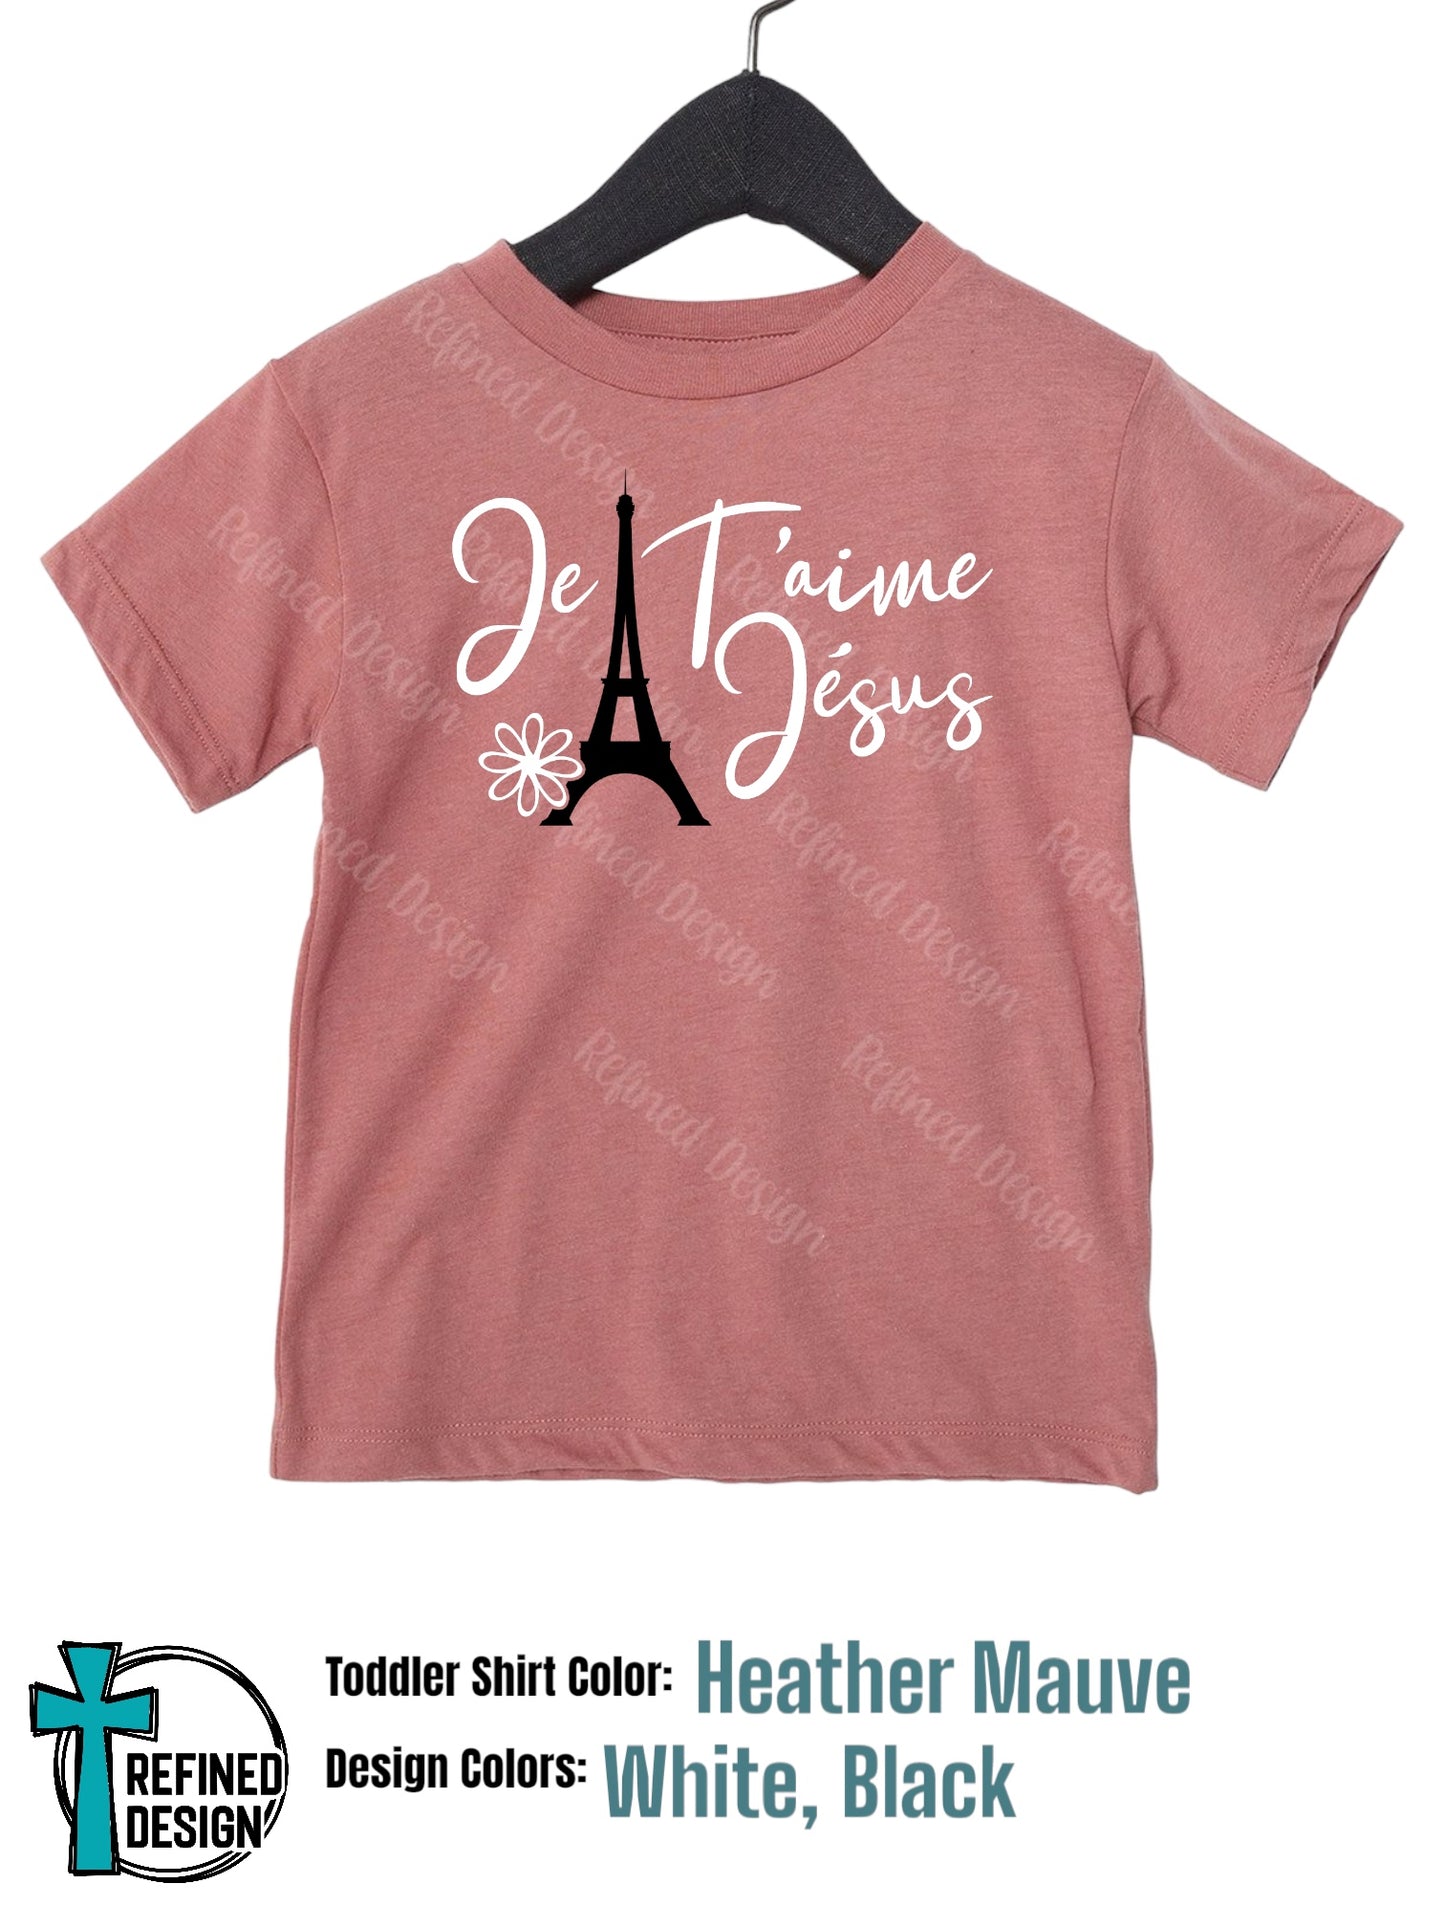 “Je T’aime (French: I Love) Jesus” Toddler Shirt